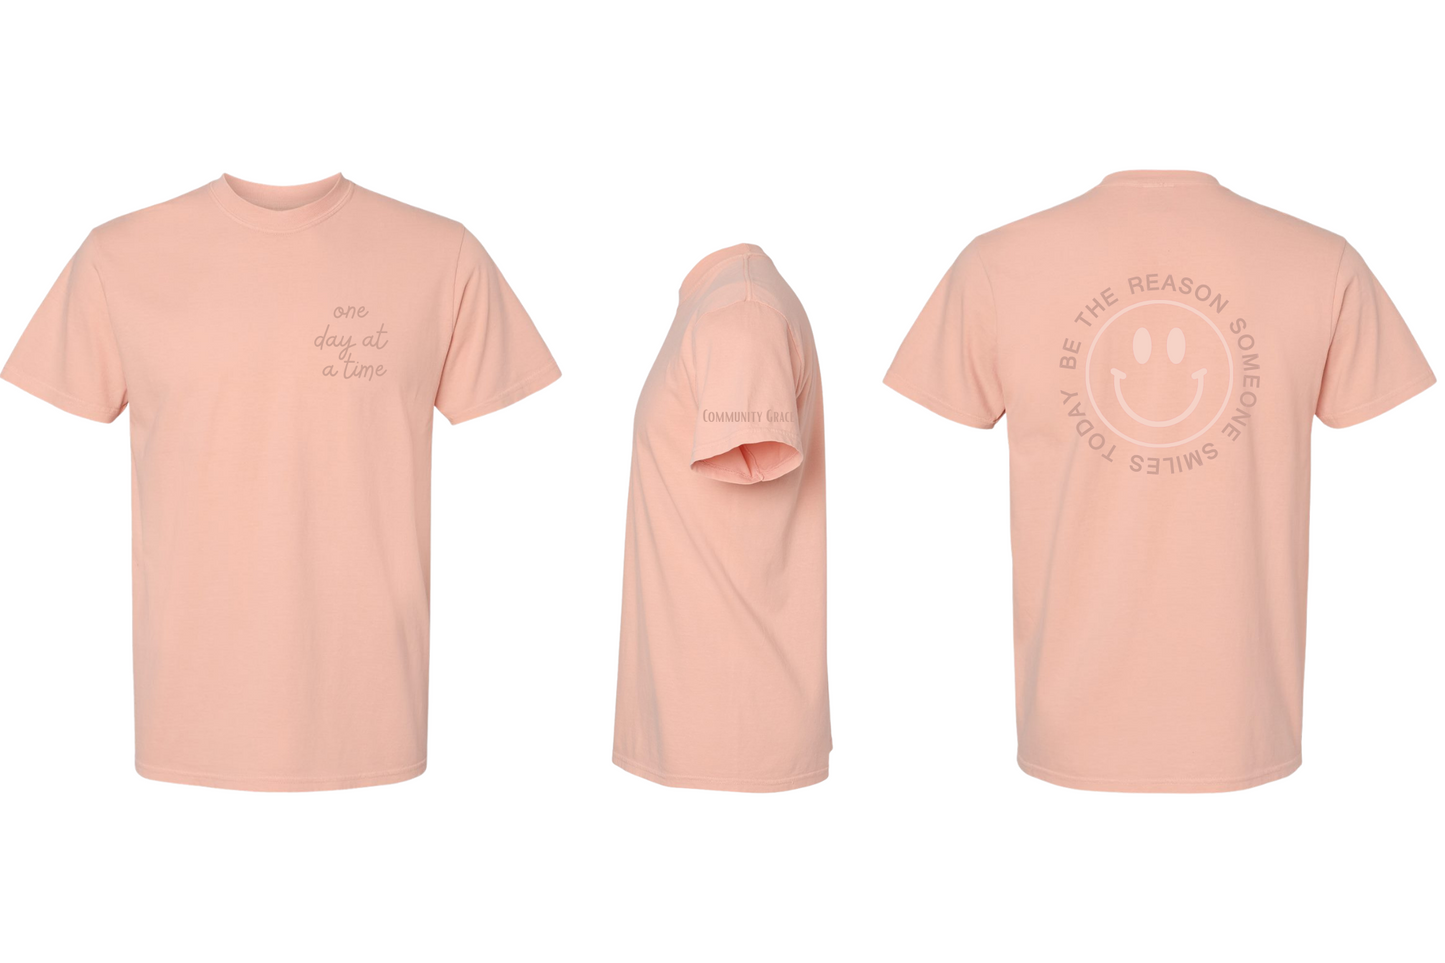 peach short sleeve shirt with "one day at a time" on the left chest area of the shirt and Community Grace on the sleeve in dark orange tones. On the back of the shirt there is a smiley face in a pale peach color with the words "BE THE REASON SOMEONE SMILES TODAY" around it in capital letters in a darker orange tone